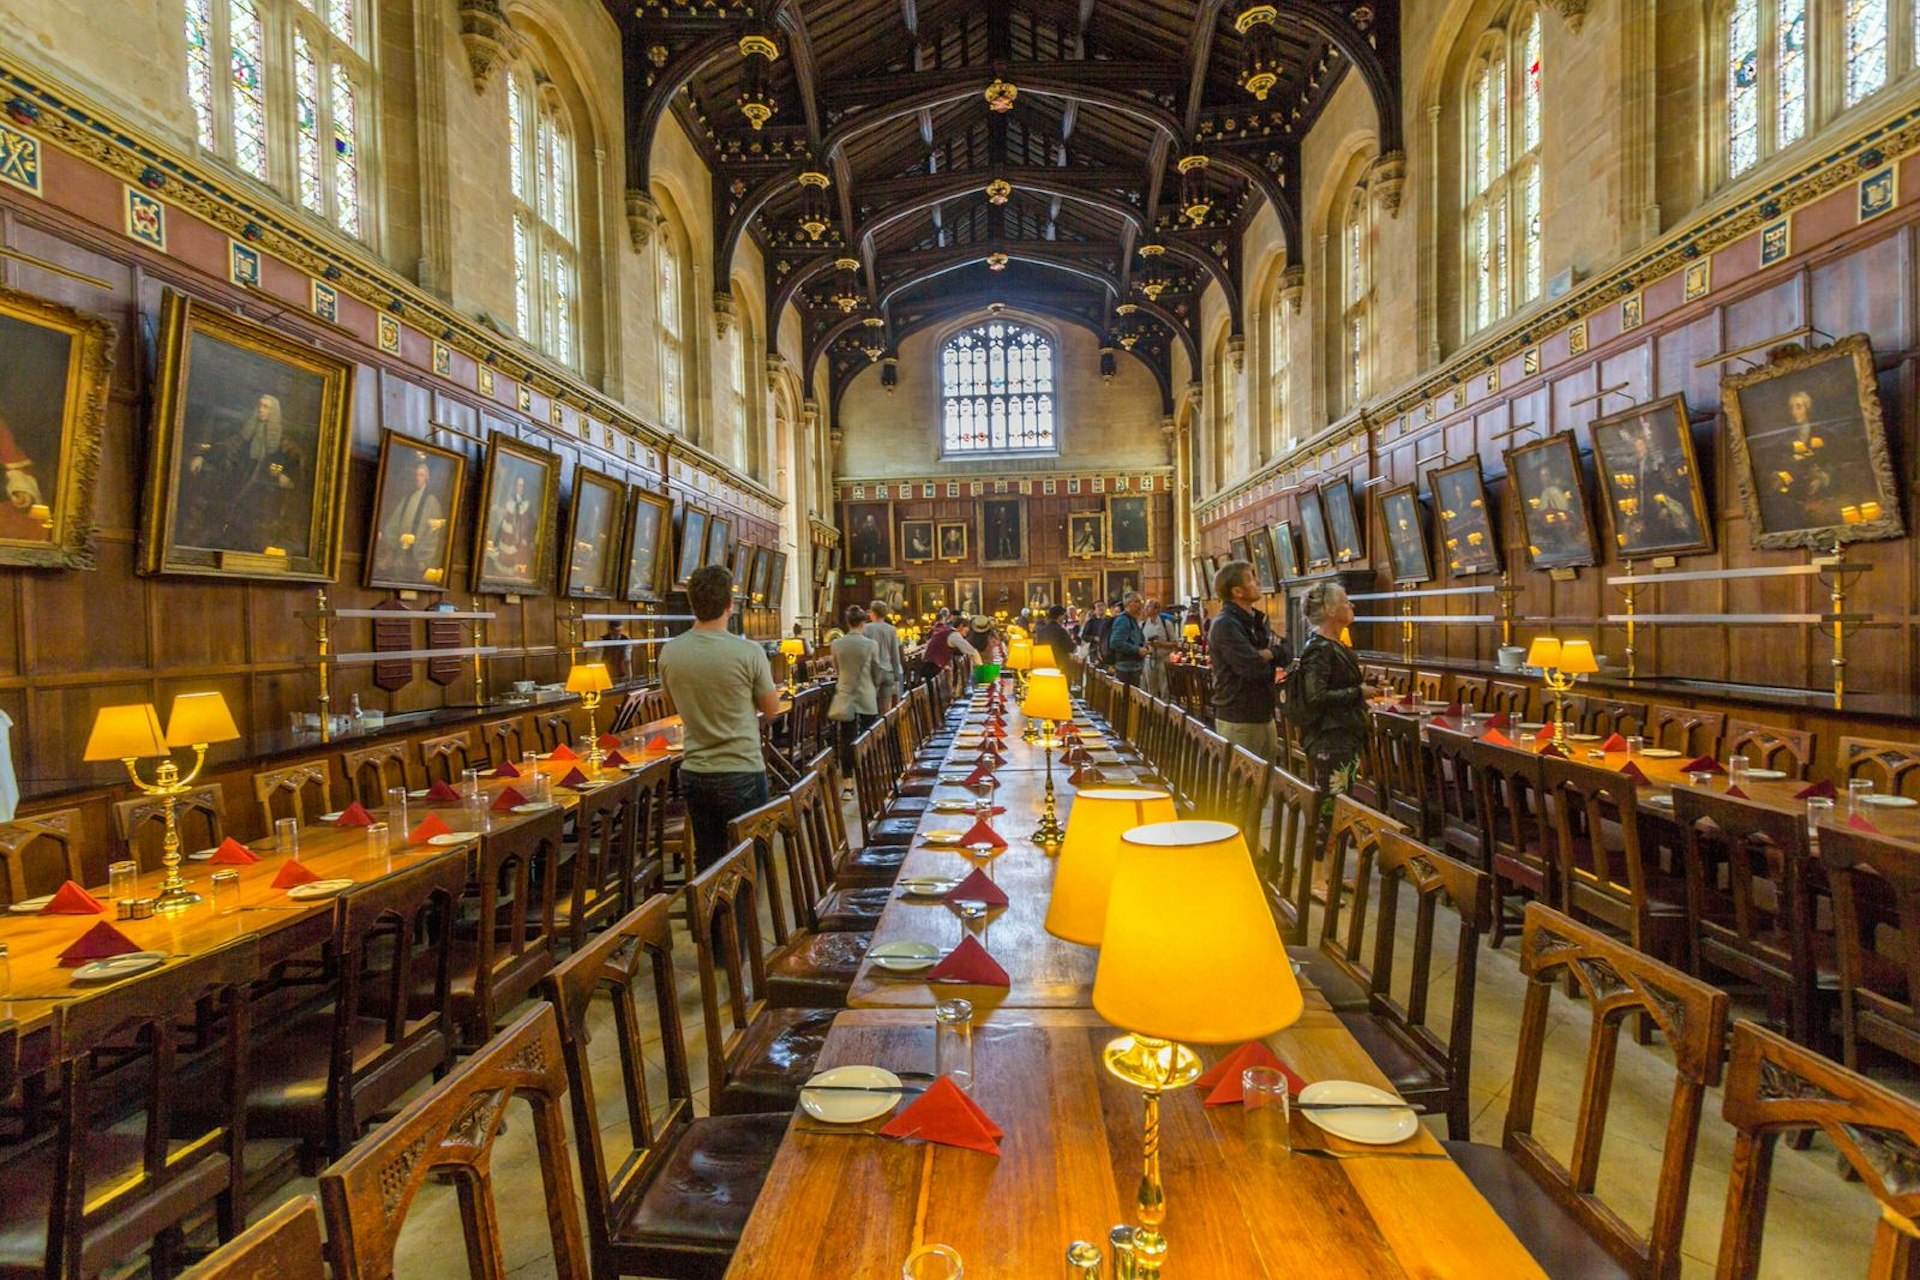 Christ Church's Great Hall, the centre of college life and the inspiration for Hogwarts' own Great Hall © eXpose / Shutterstock